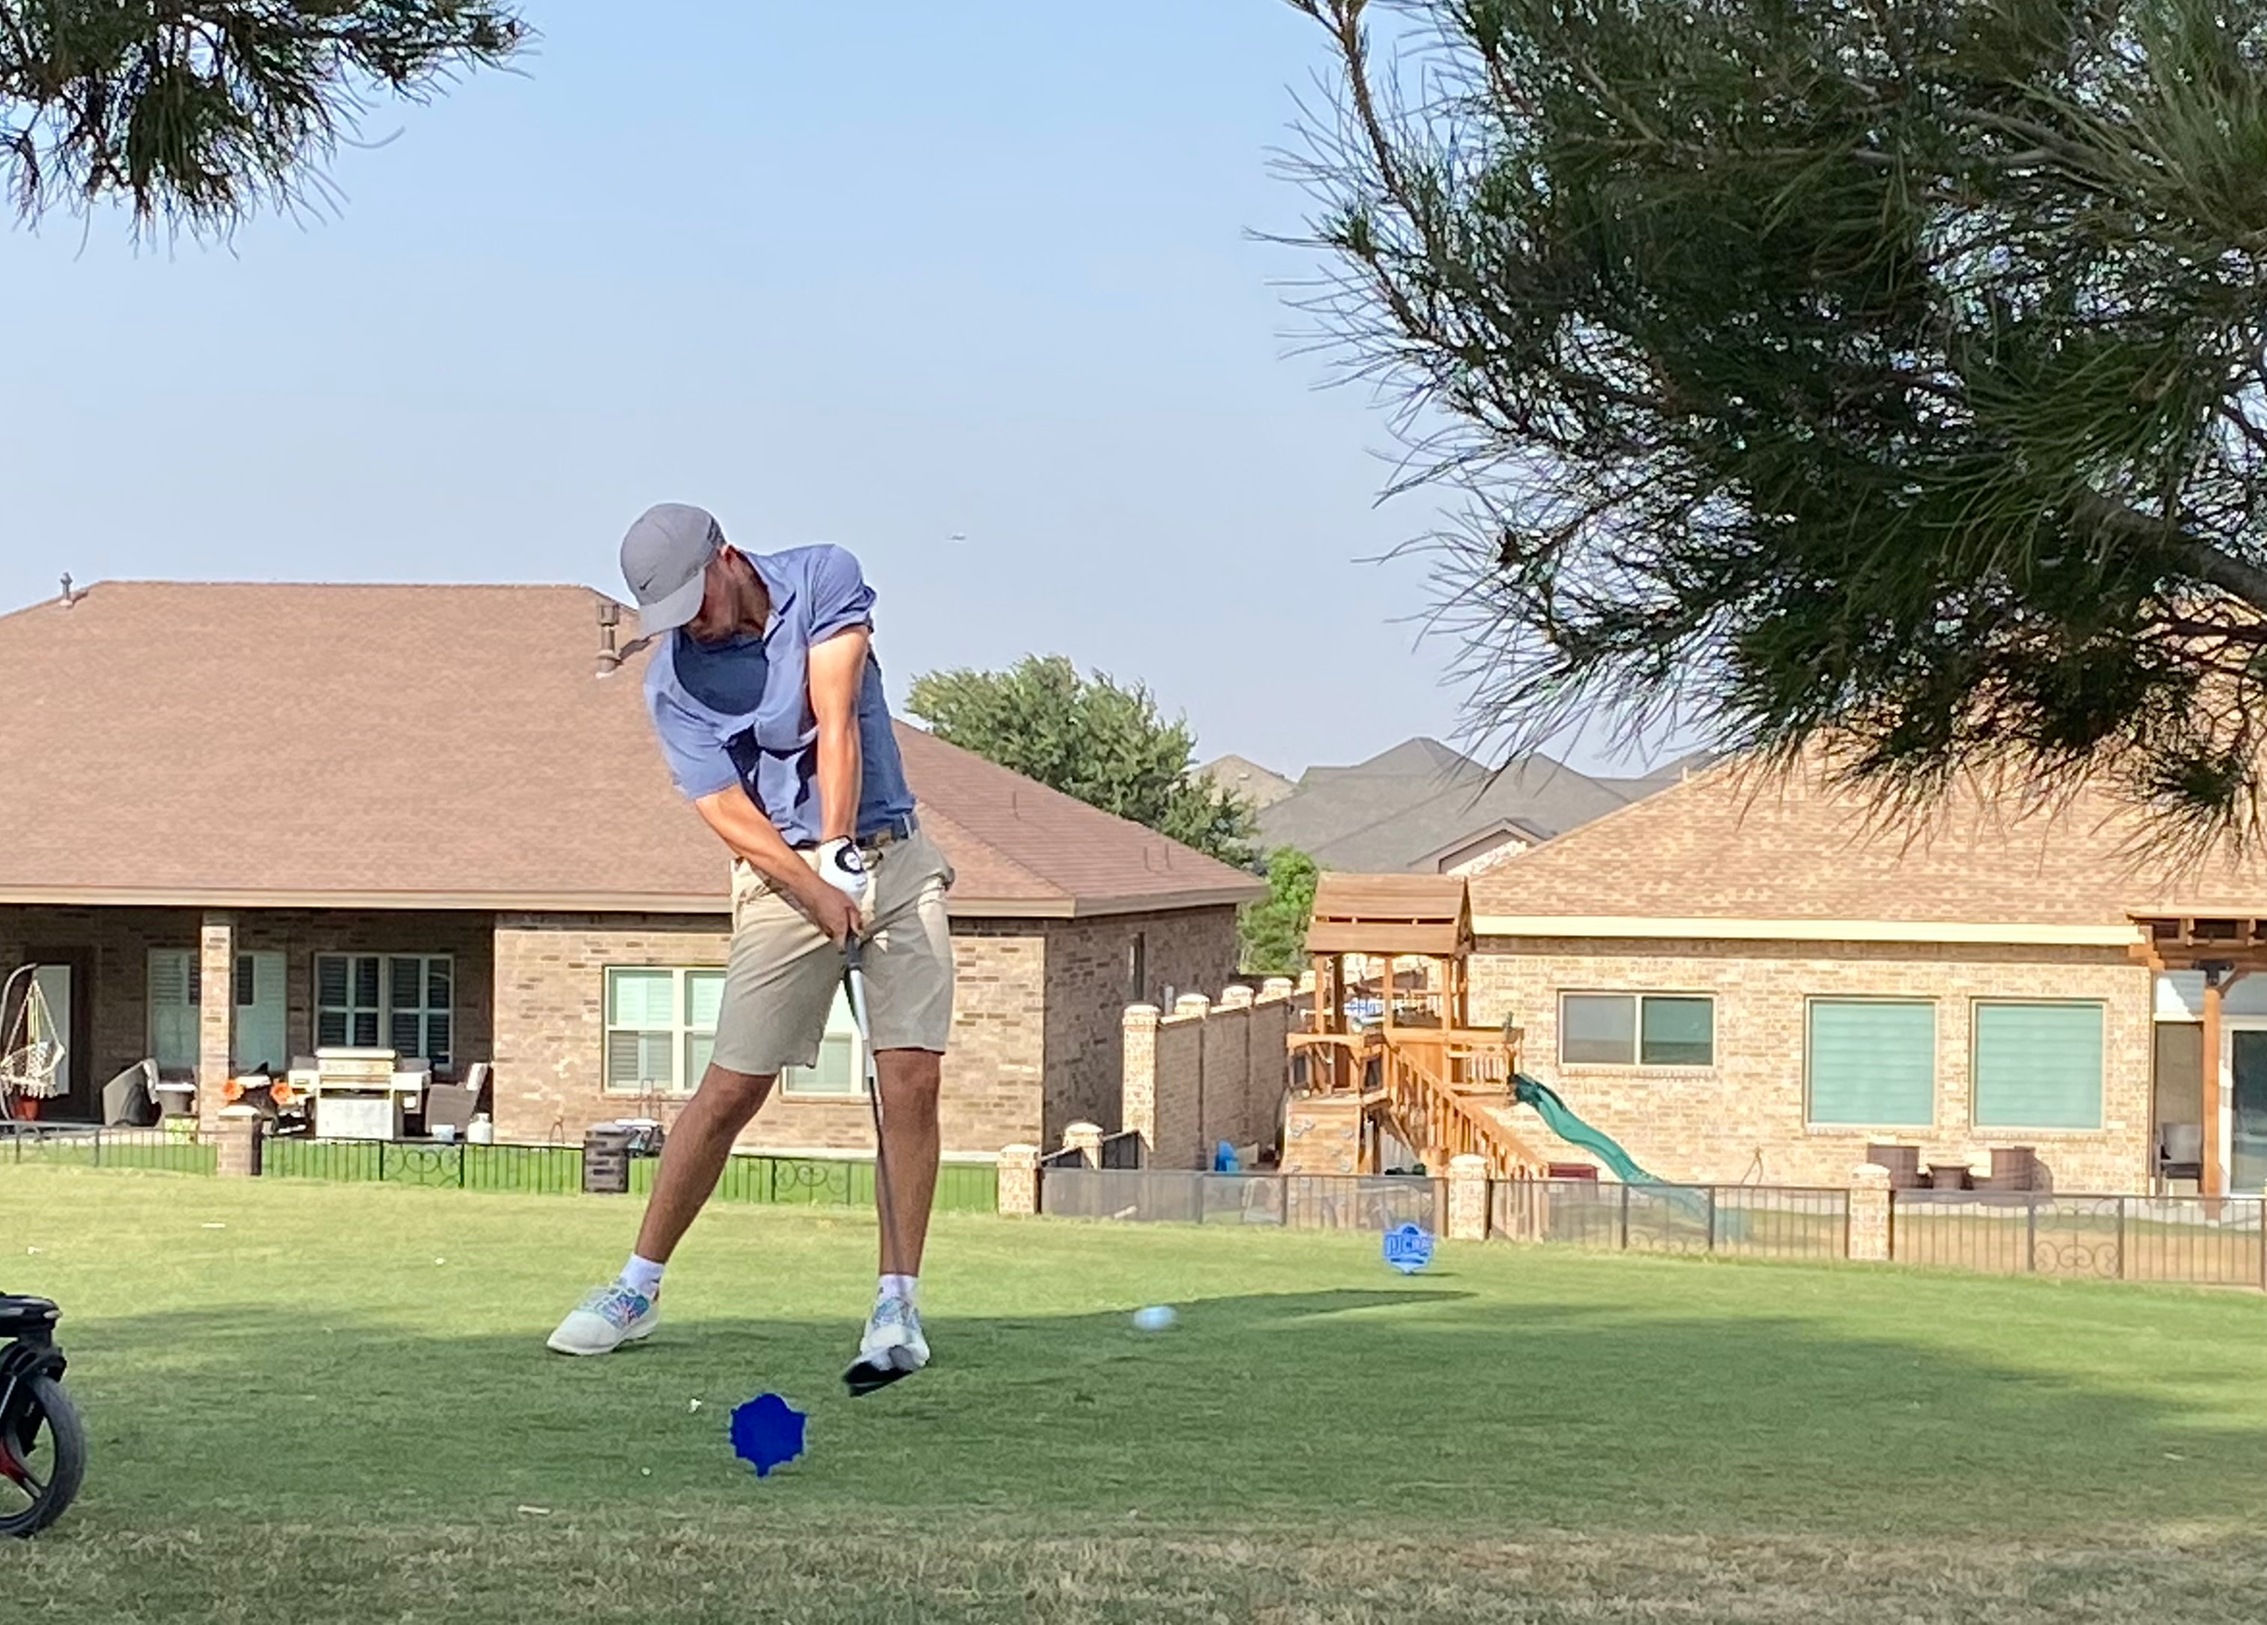 Men's golf team tied for second after two rounds at national tournament